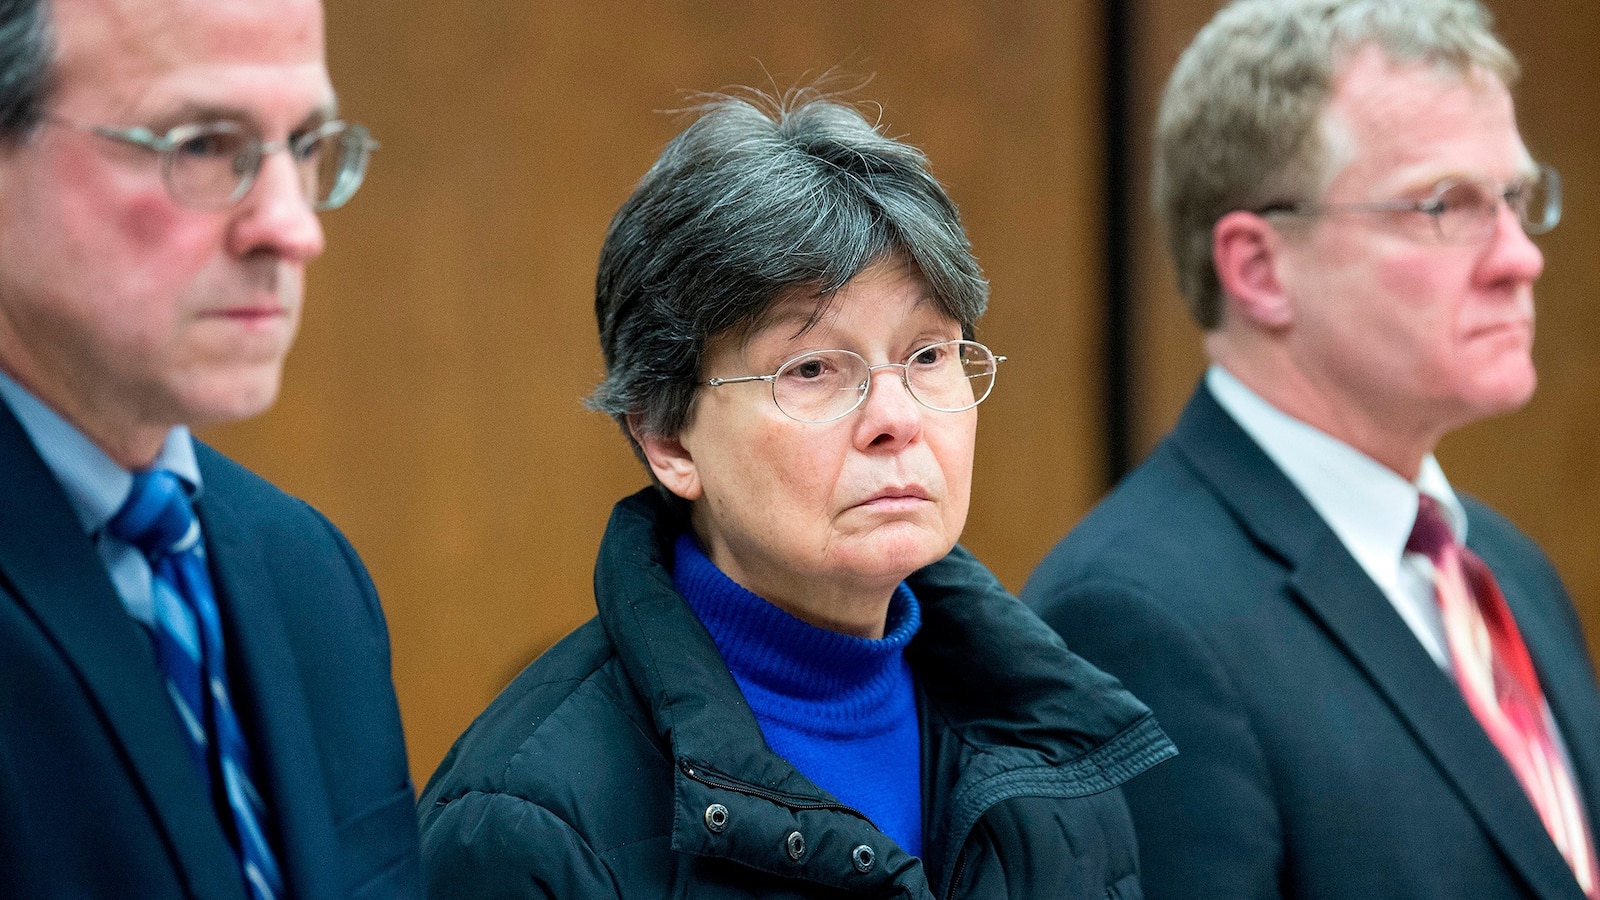 Woman found dead hours before she was to be sentenced for killing her husband